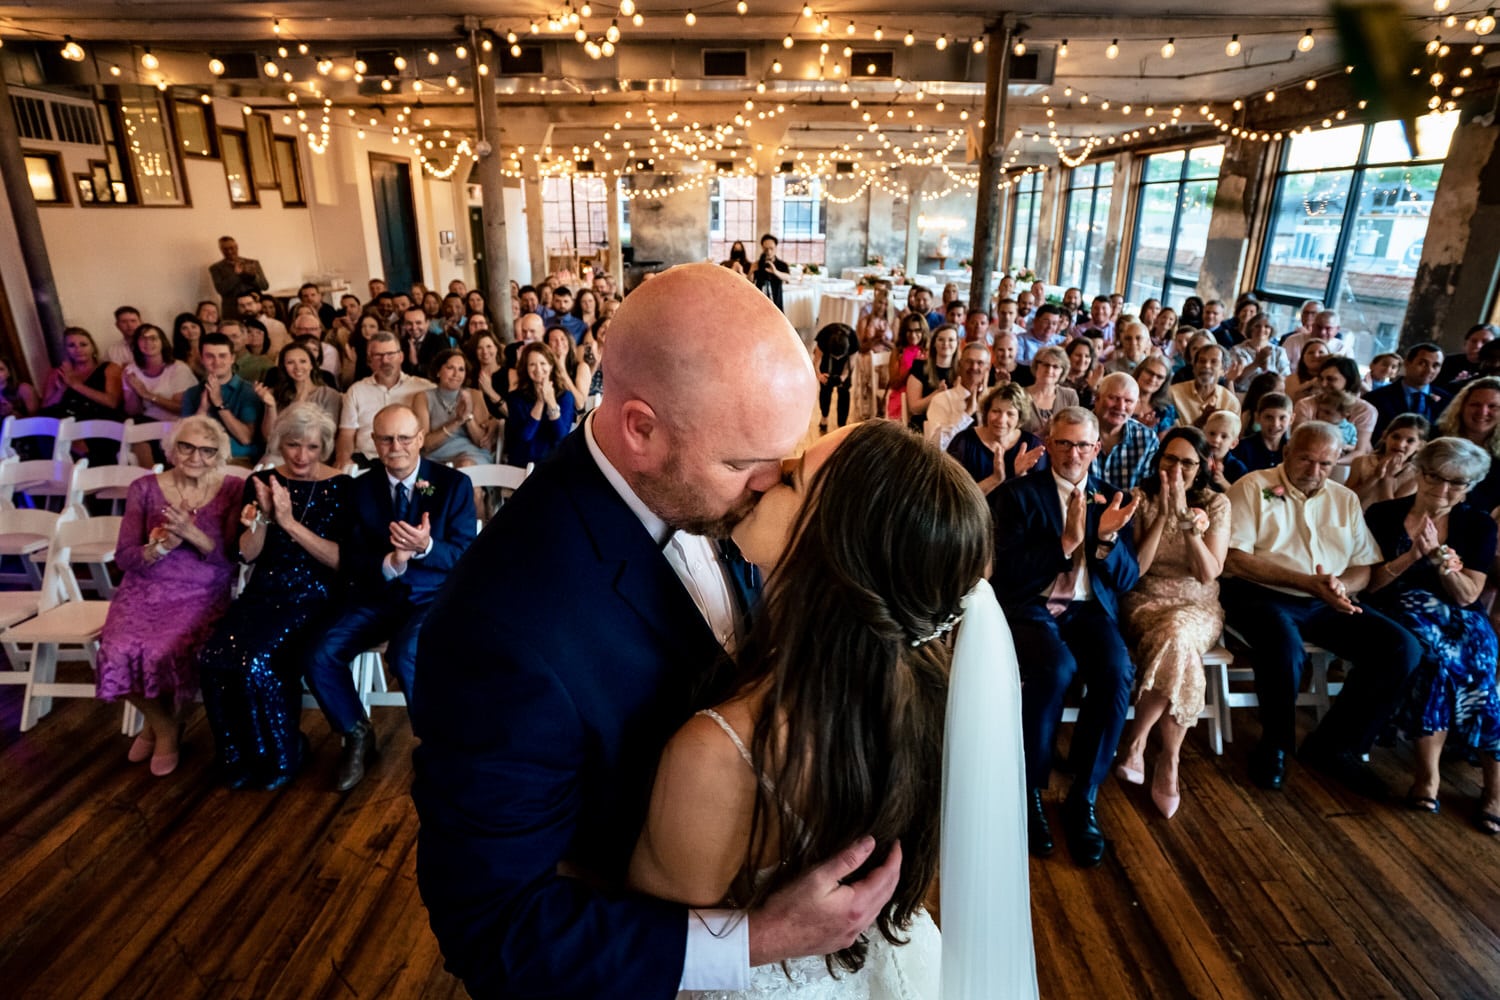 A colorful, candid picture taken from behind the bride and groom, looking back at the audience as they share their first kiss; their guests clapping and cheering in the background. 